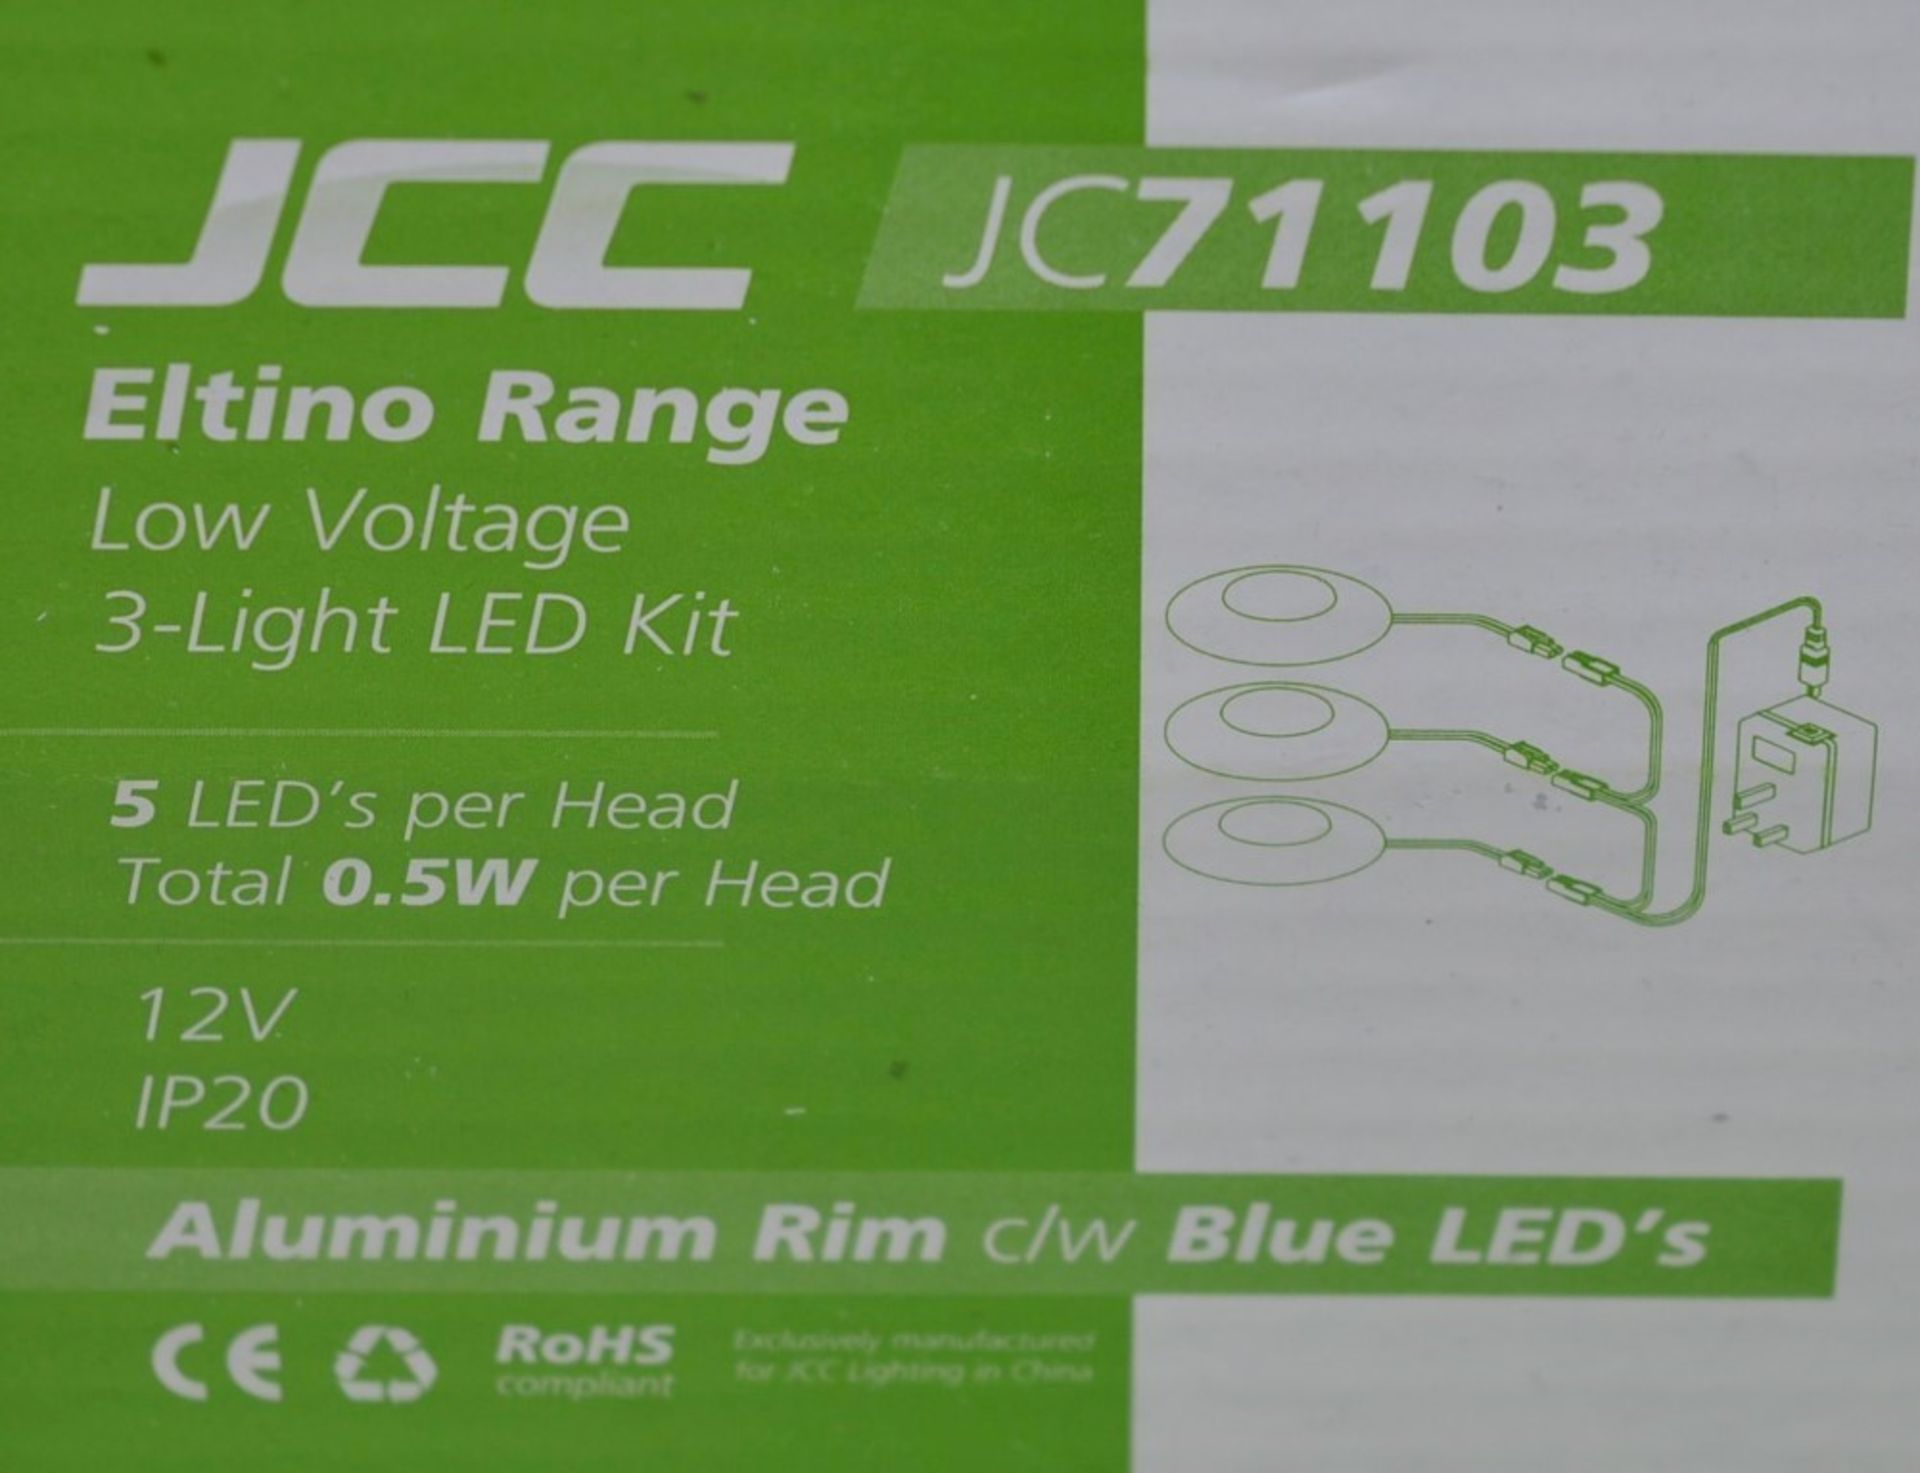 6 x JCC Lighting ELTINO Indoor Blue LED Floor or Wall Lighting Kits - Lot Includes Four Sets - Ideal - Image 5 of 5